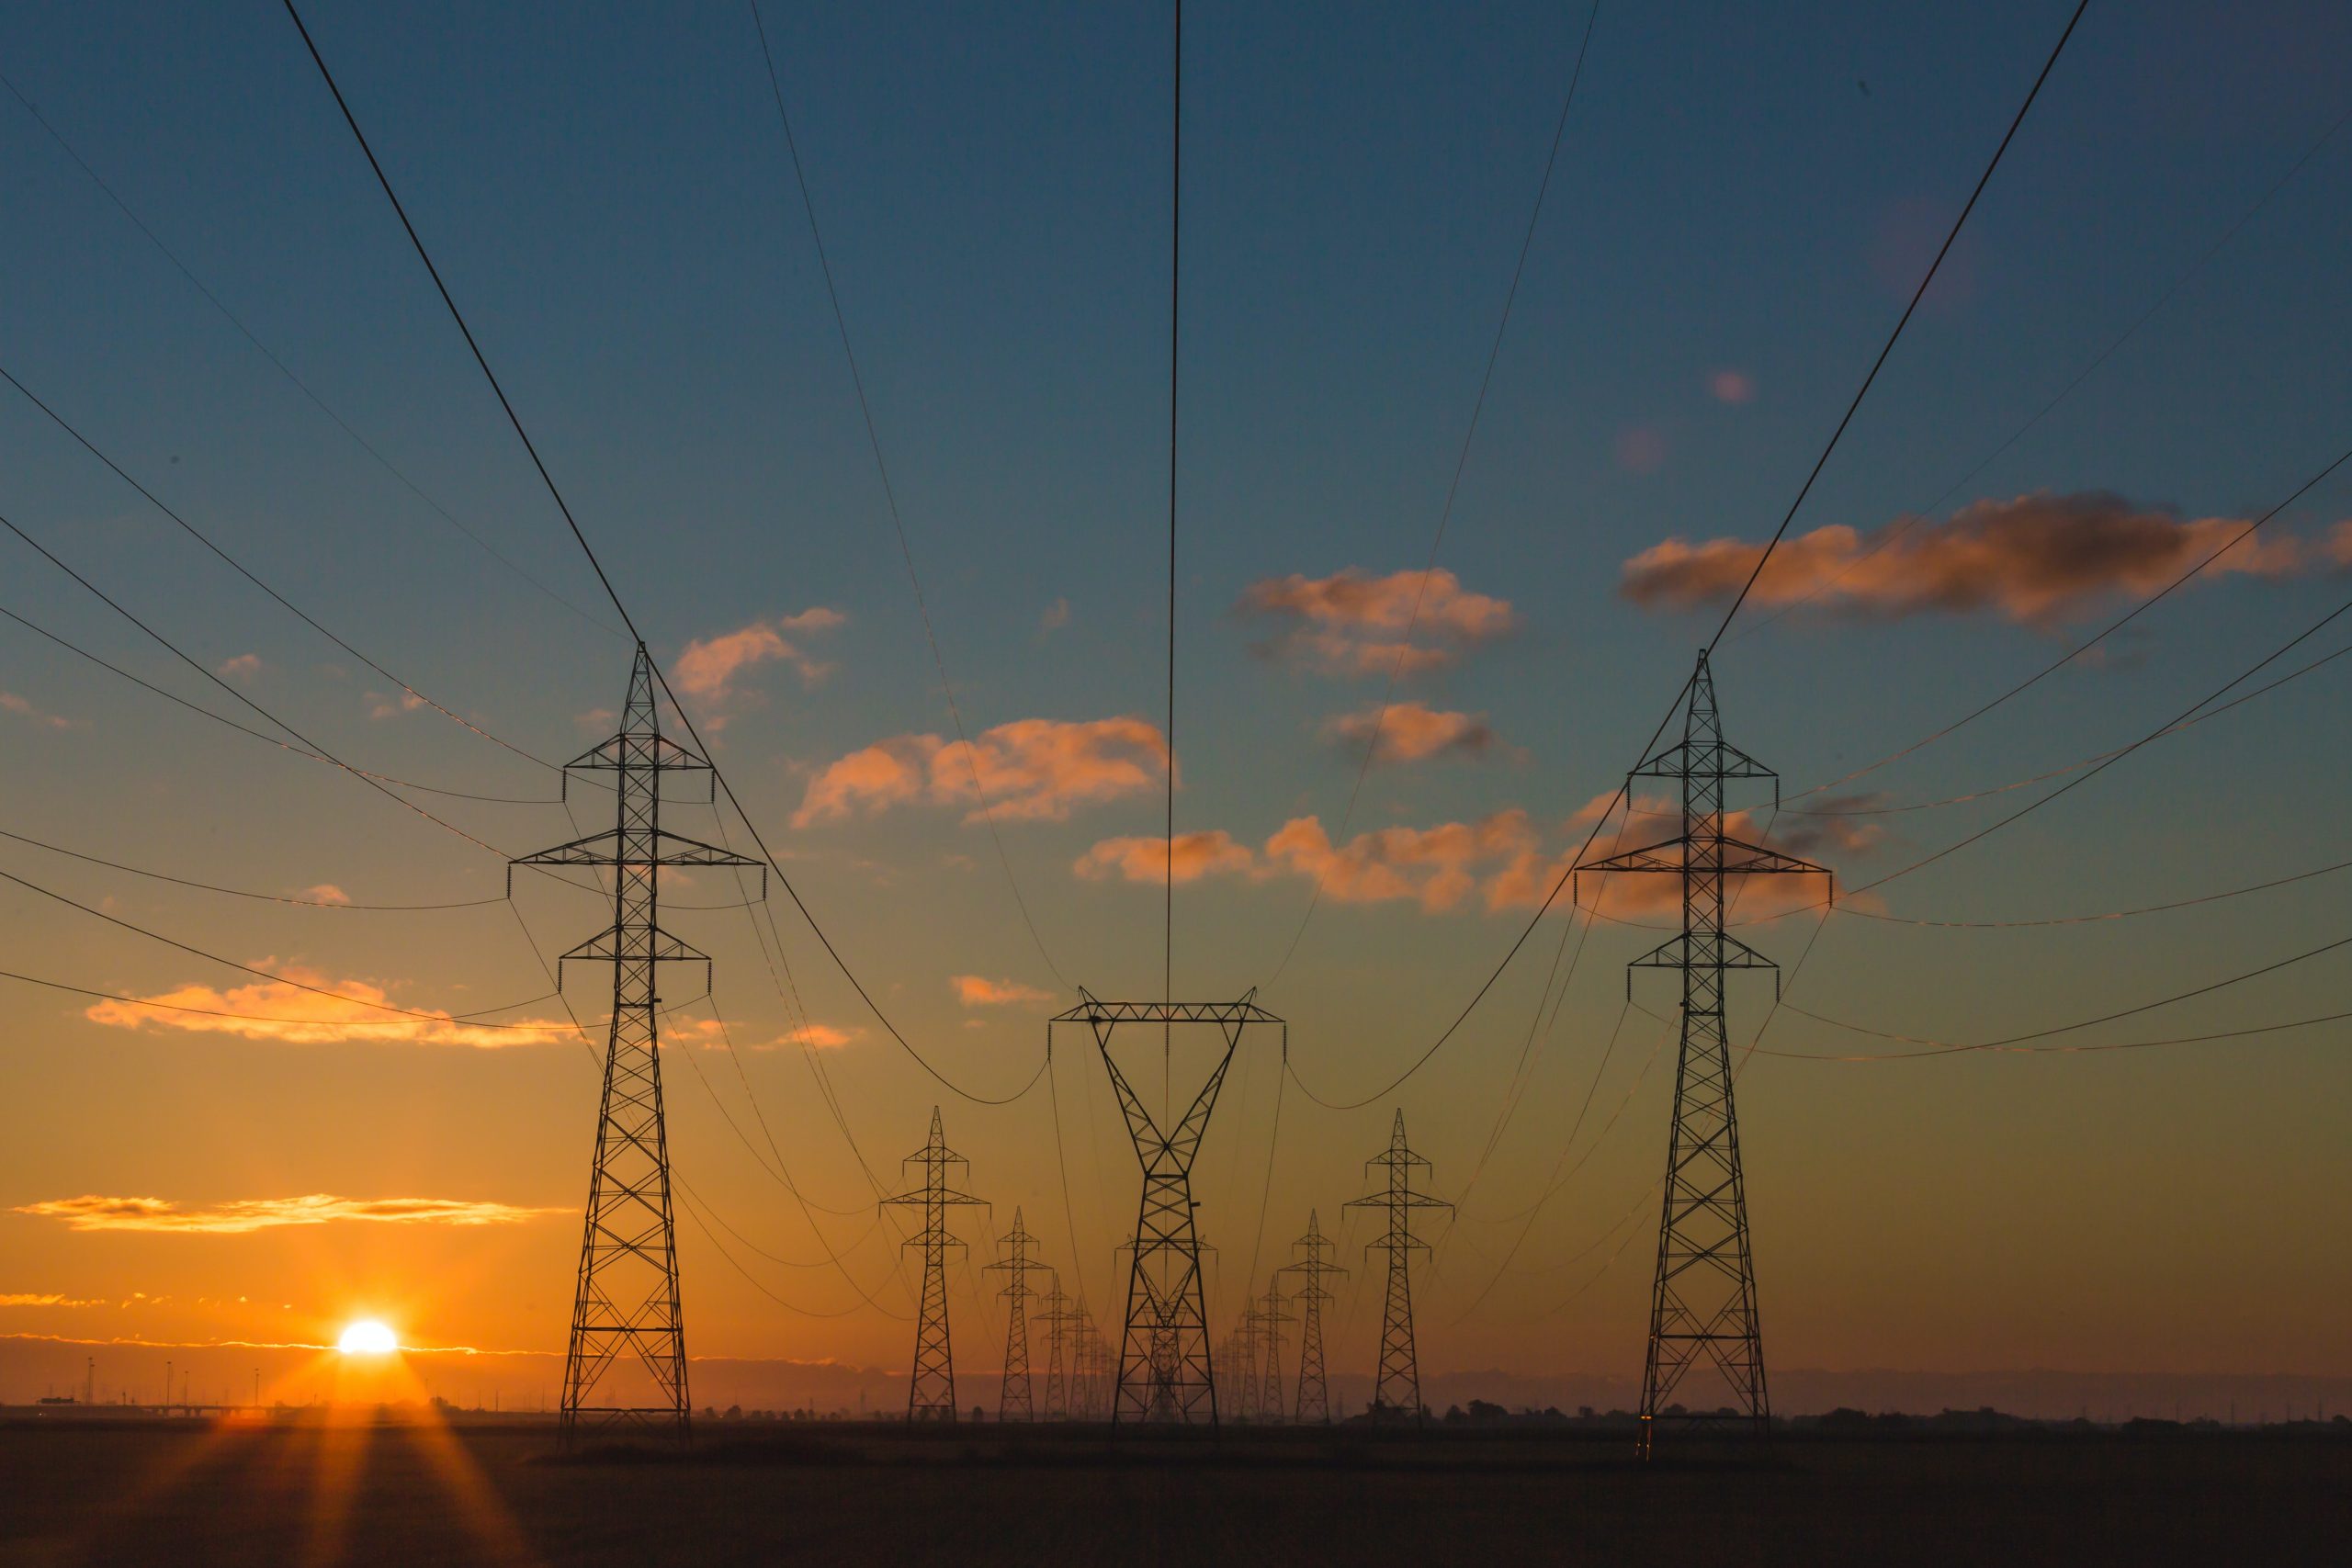 Lines of transmission towers with the sun setting in the background